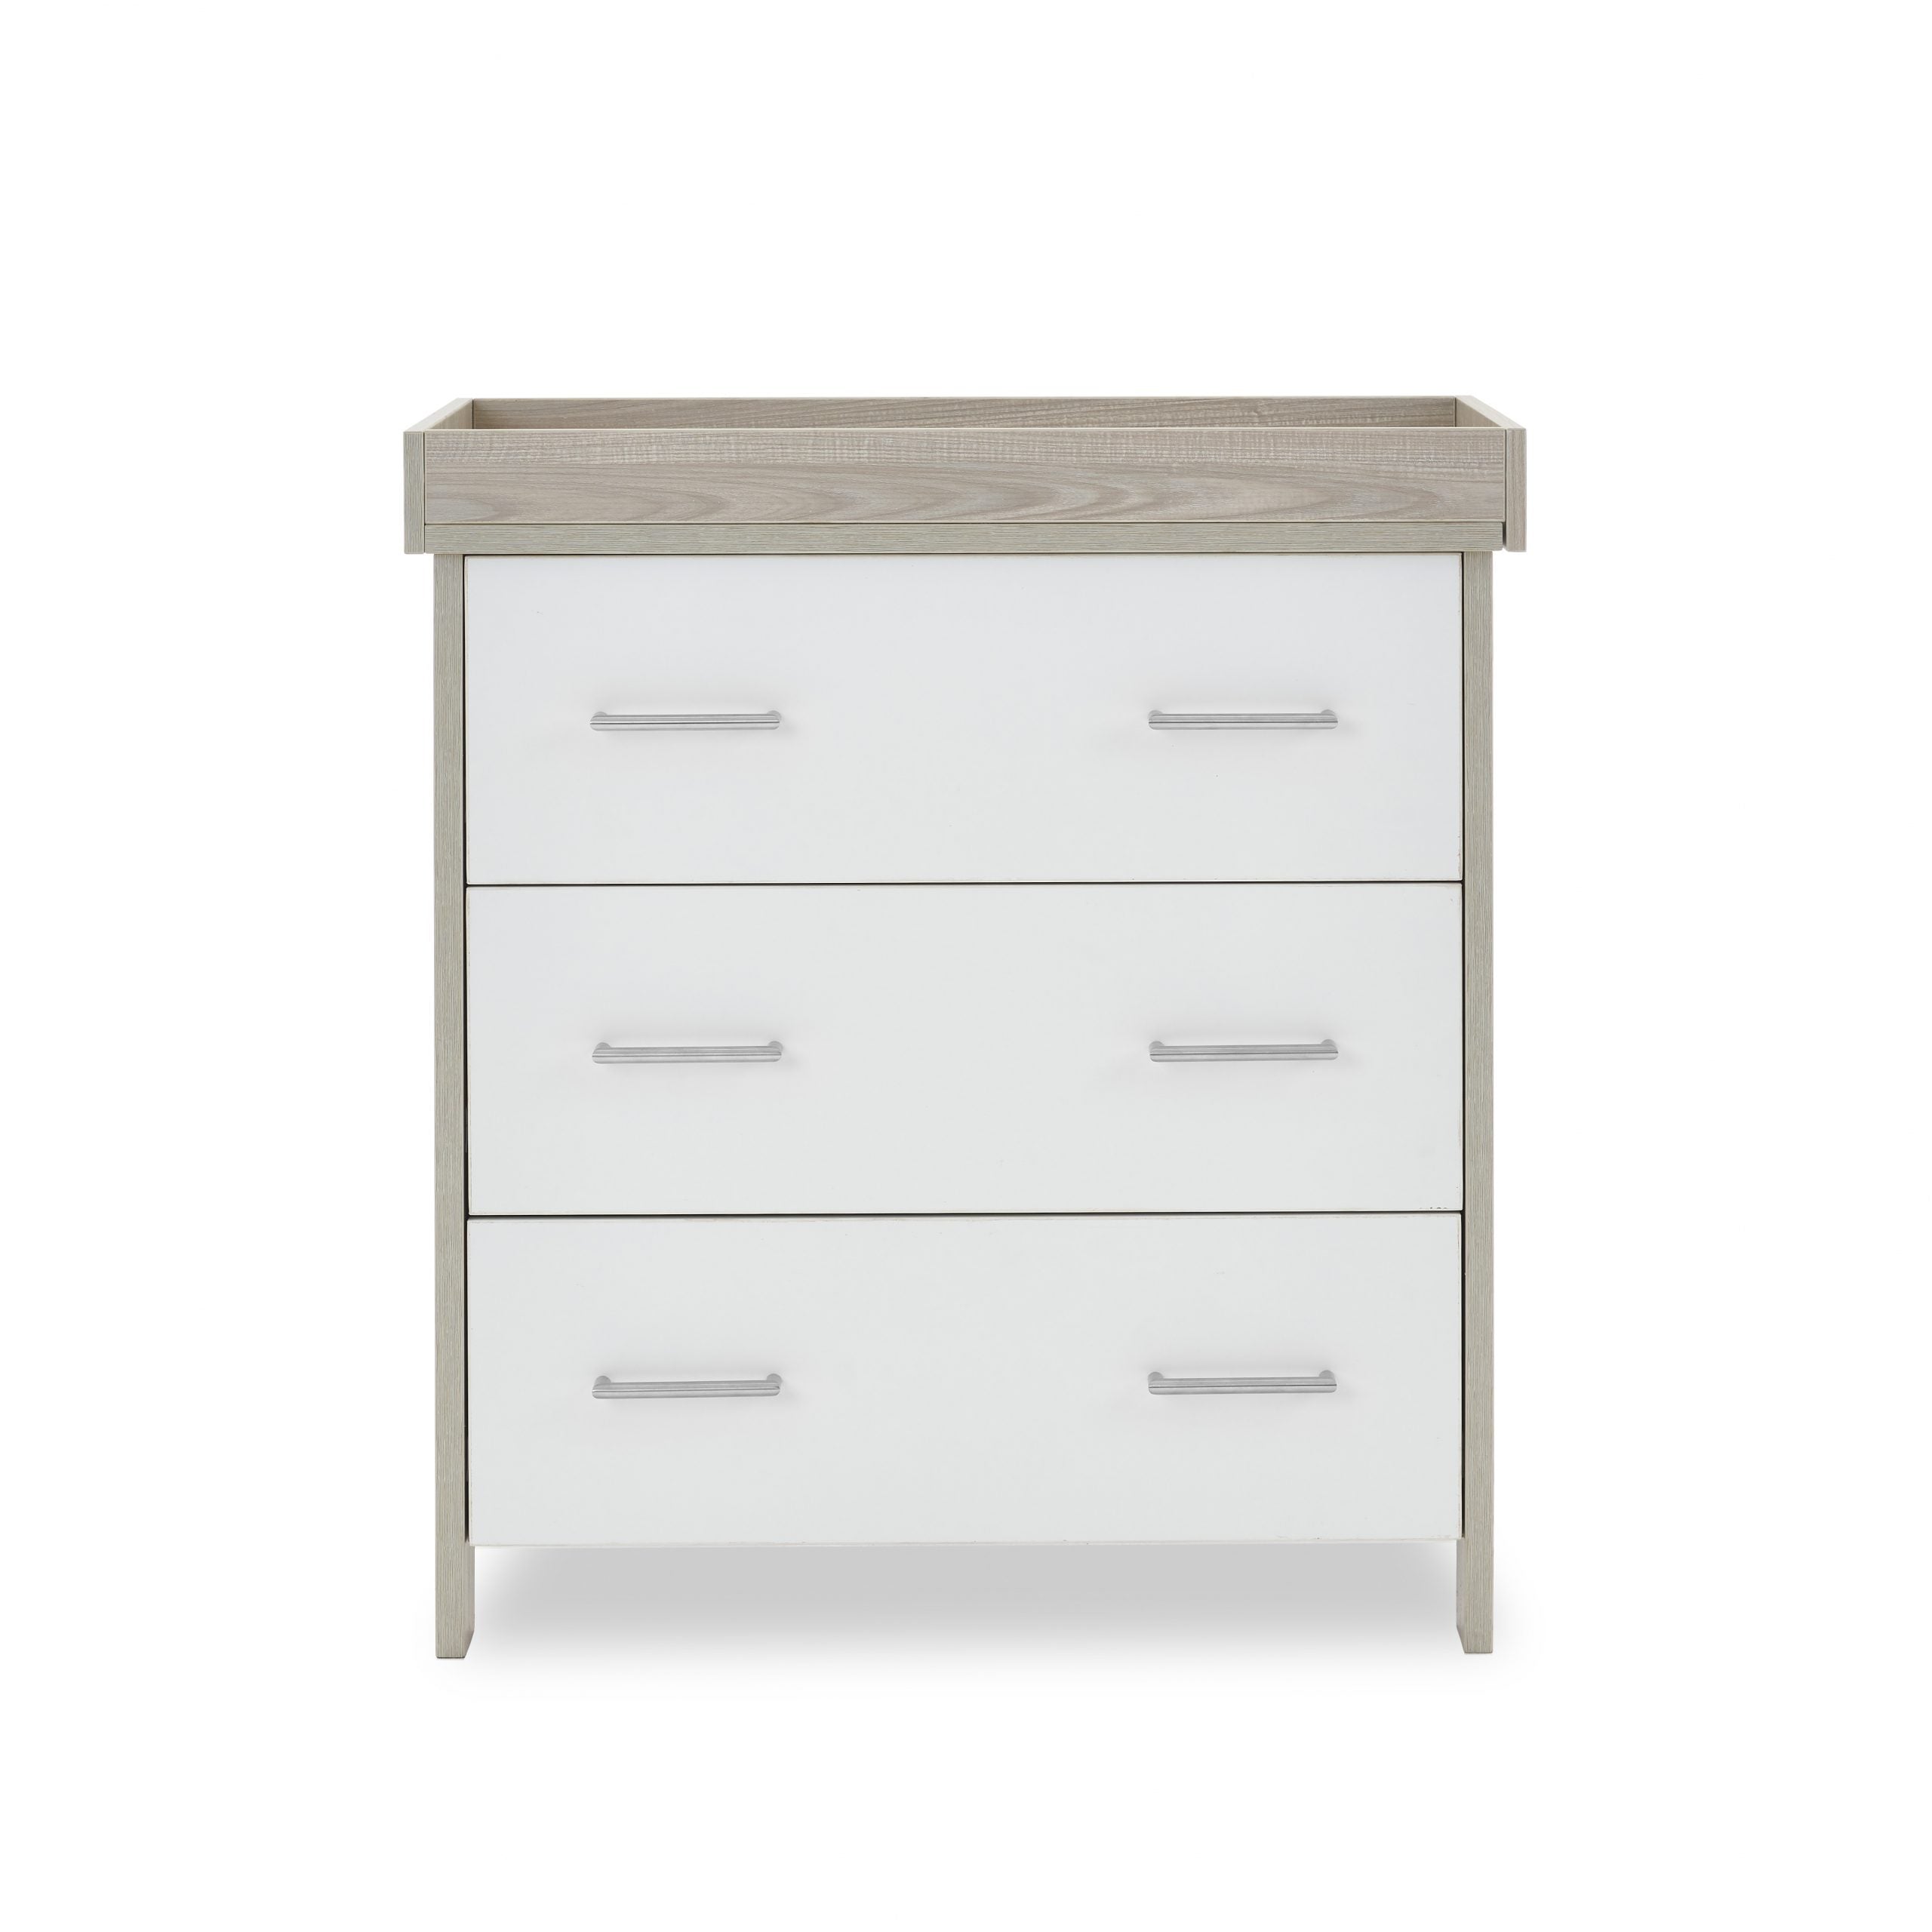 Obaby Nika Closed Changing Unit - Grey Wash with White